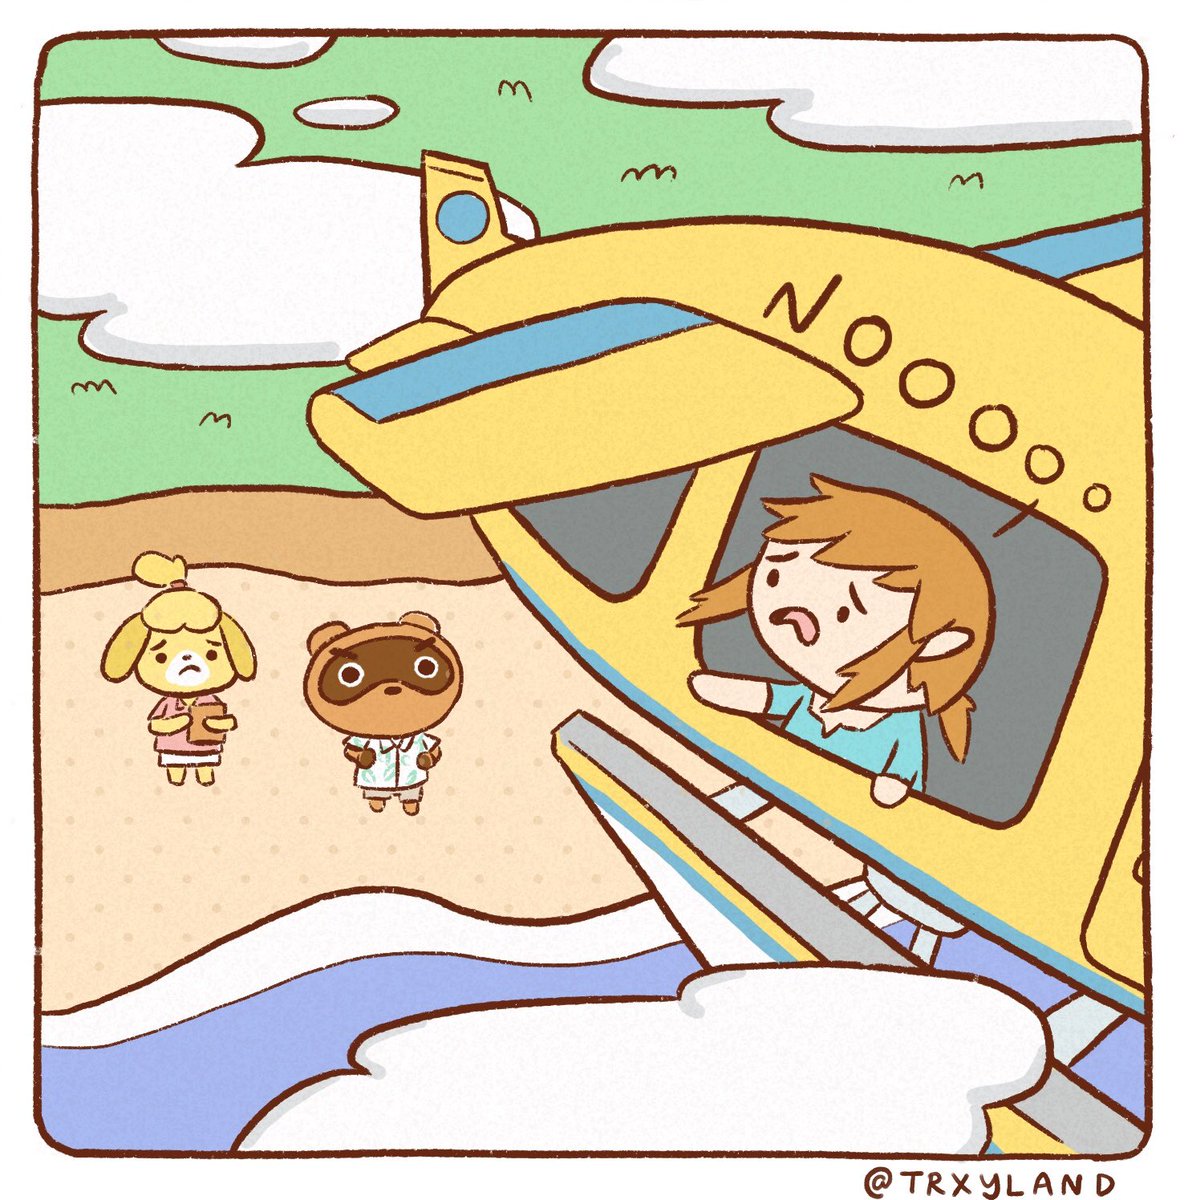 A comic about Link's deserted island stay ?? #acnh #AnimalCrossingNewHorizons 